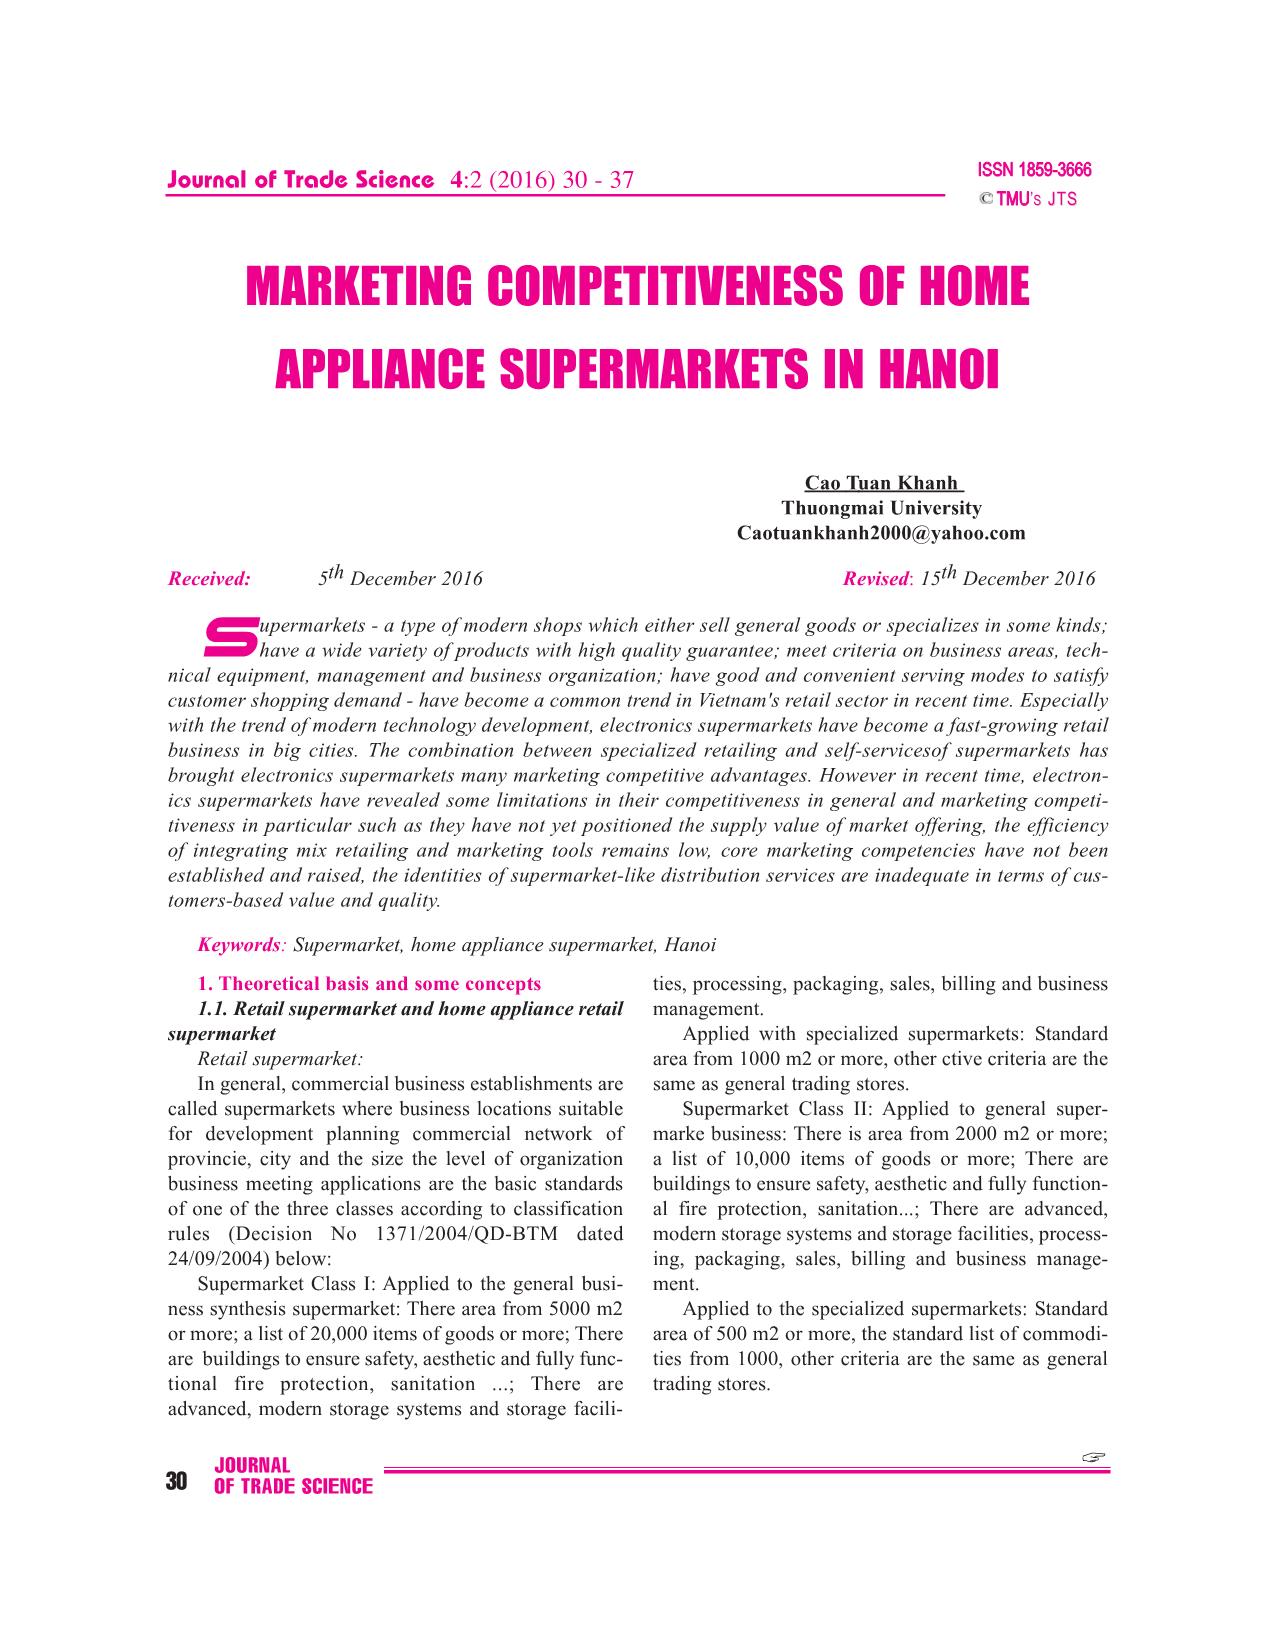 Marketing competitiveness of home appliance supermarkets in Ha Noi trang 2